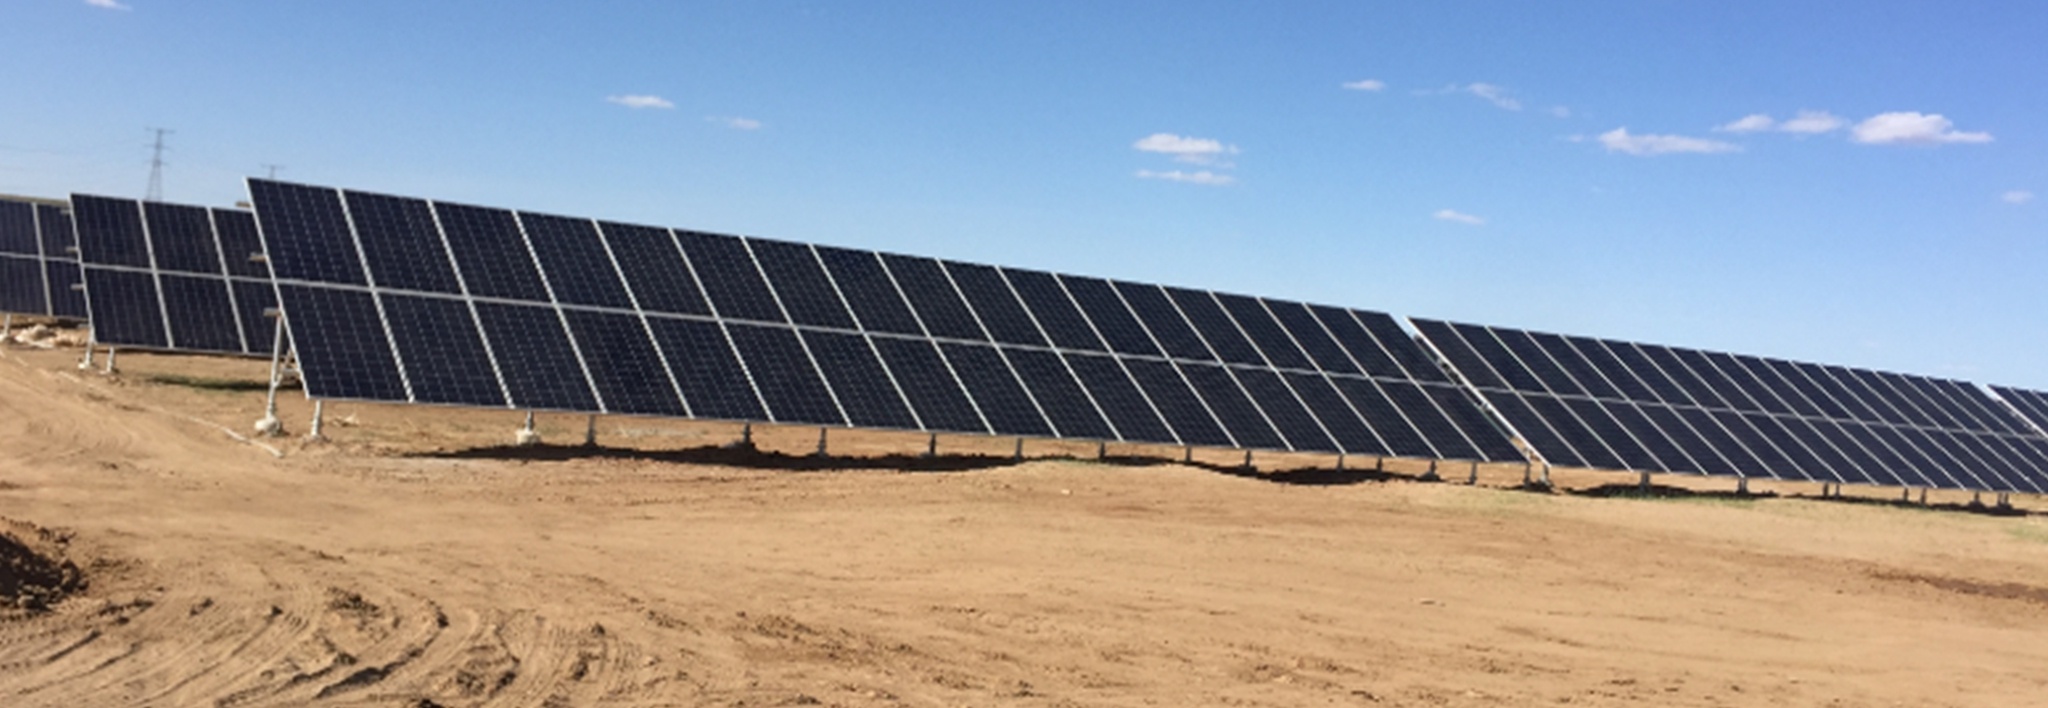 Clenergy Ground-mount Solar Project 20072018